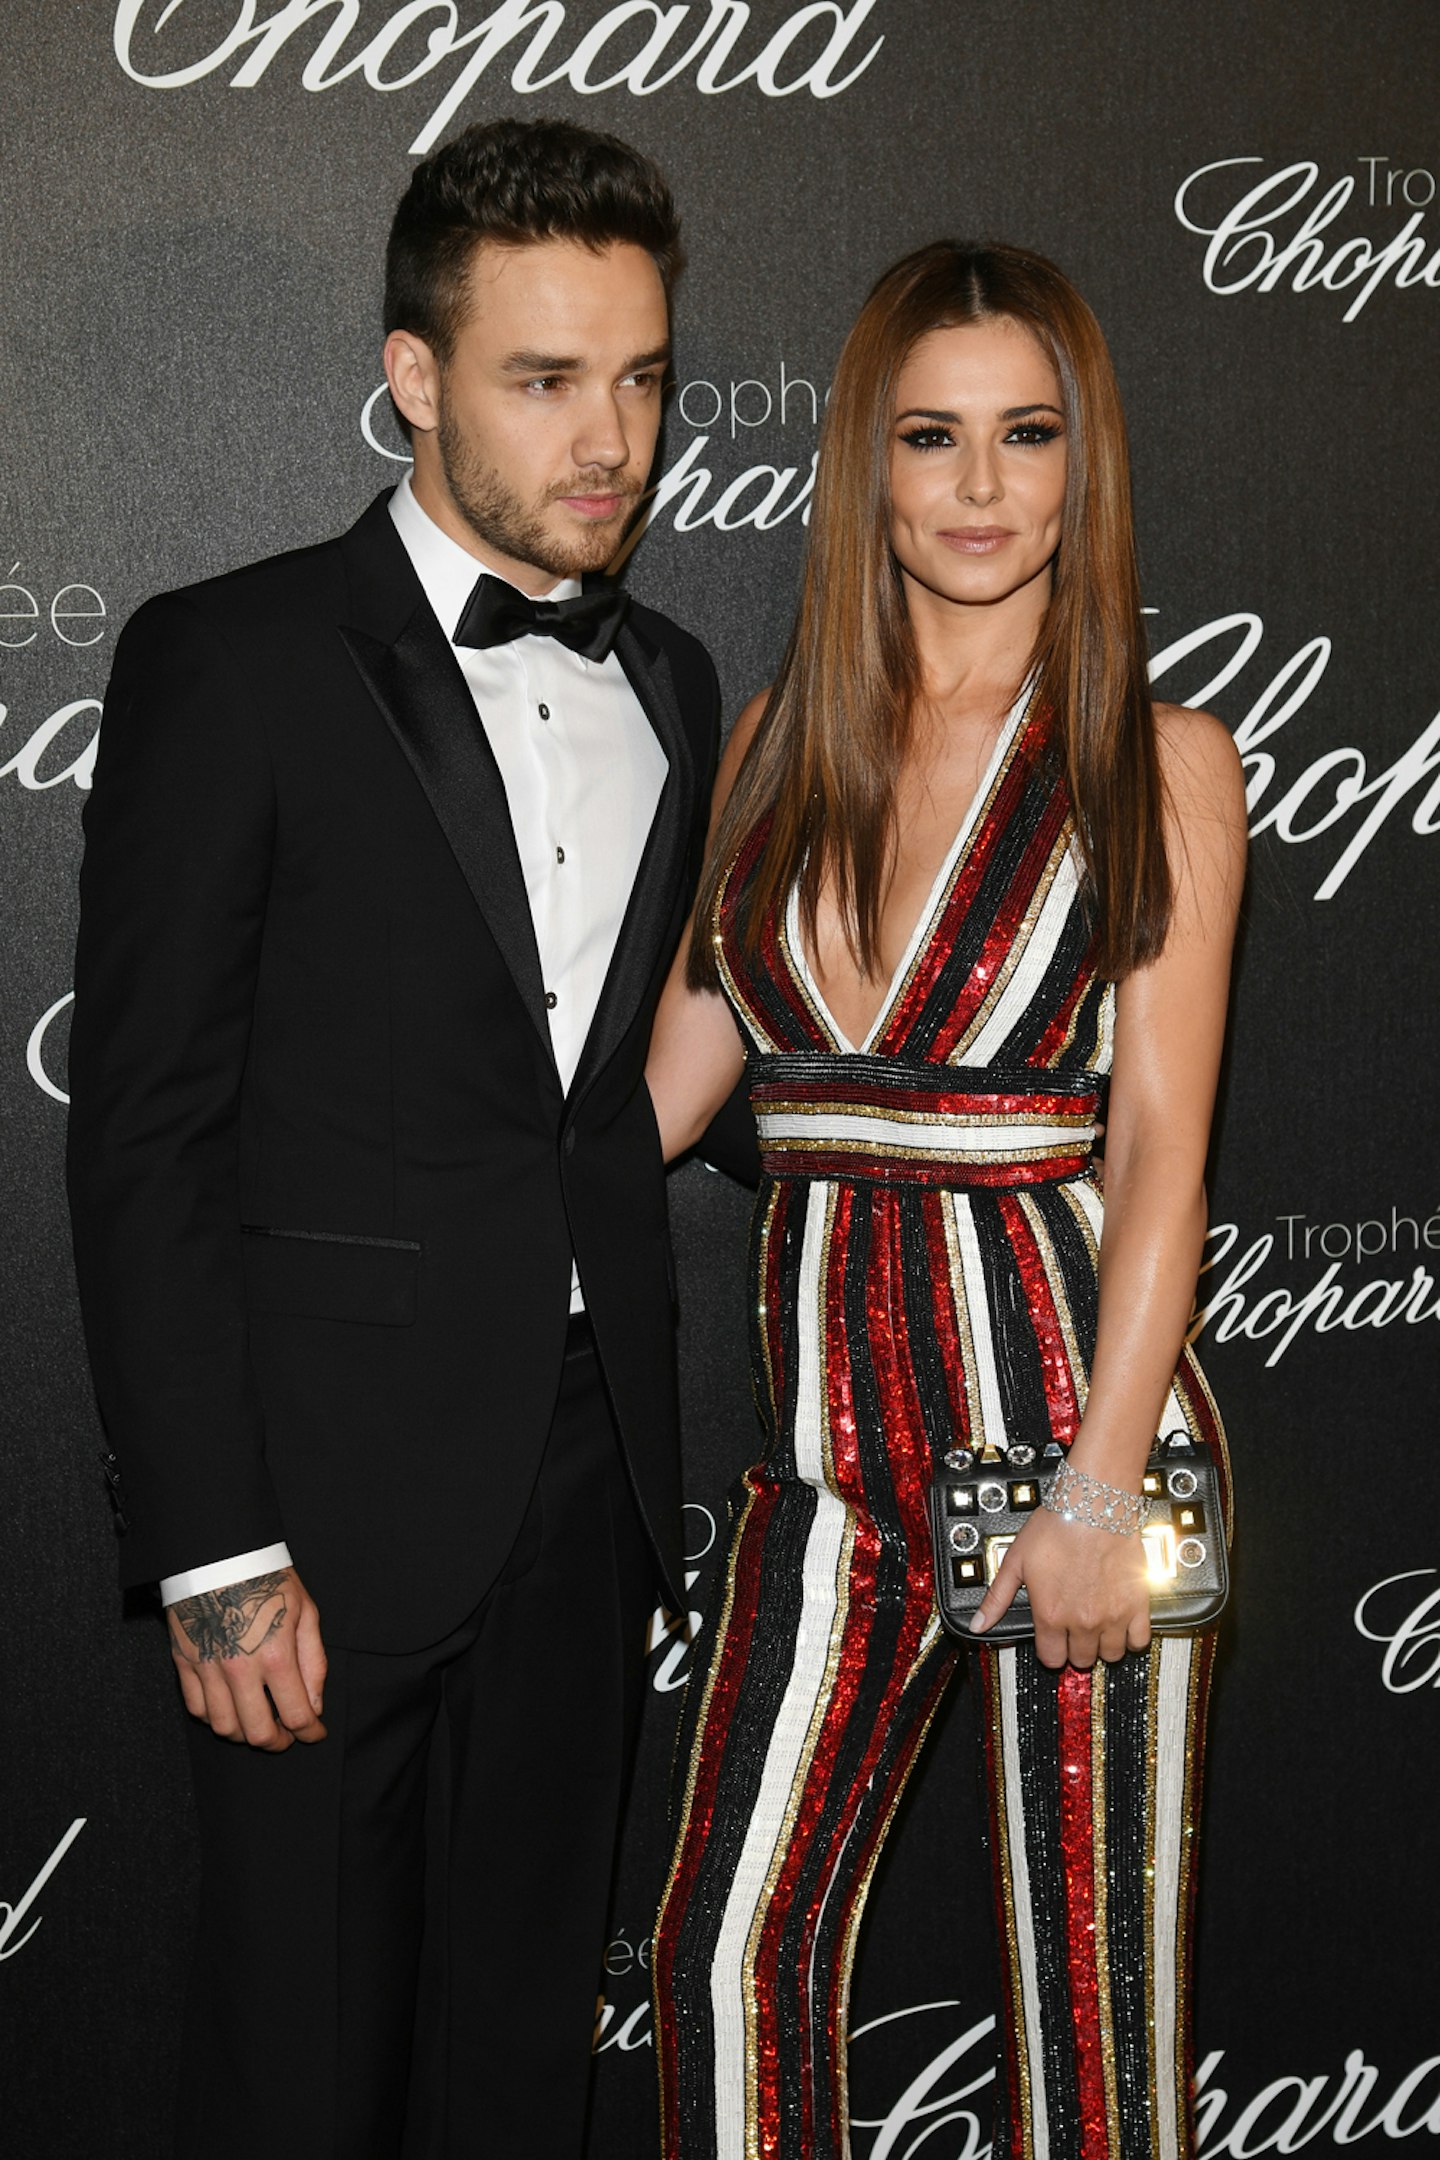 Cheryl gives birth to Liam Payne's baby